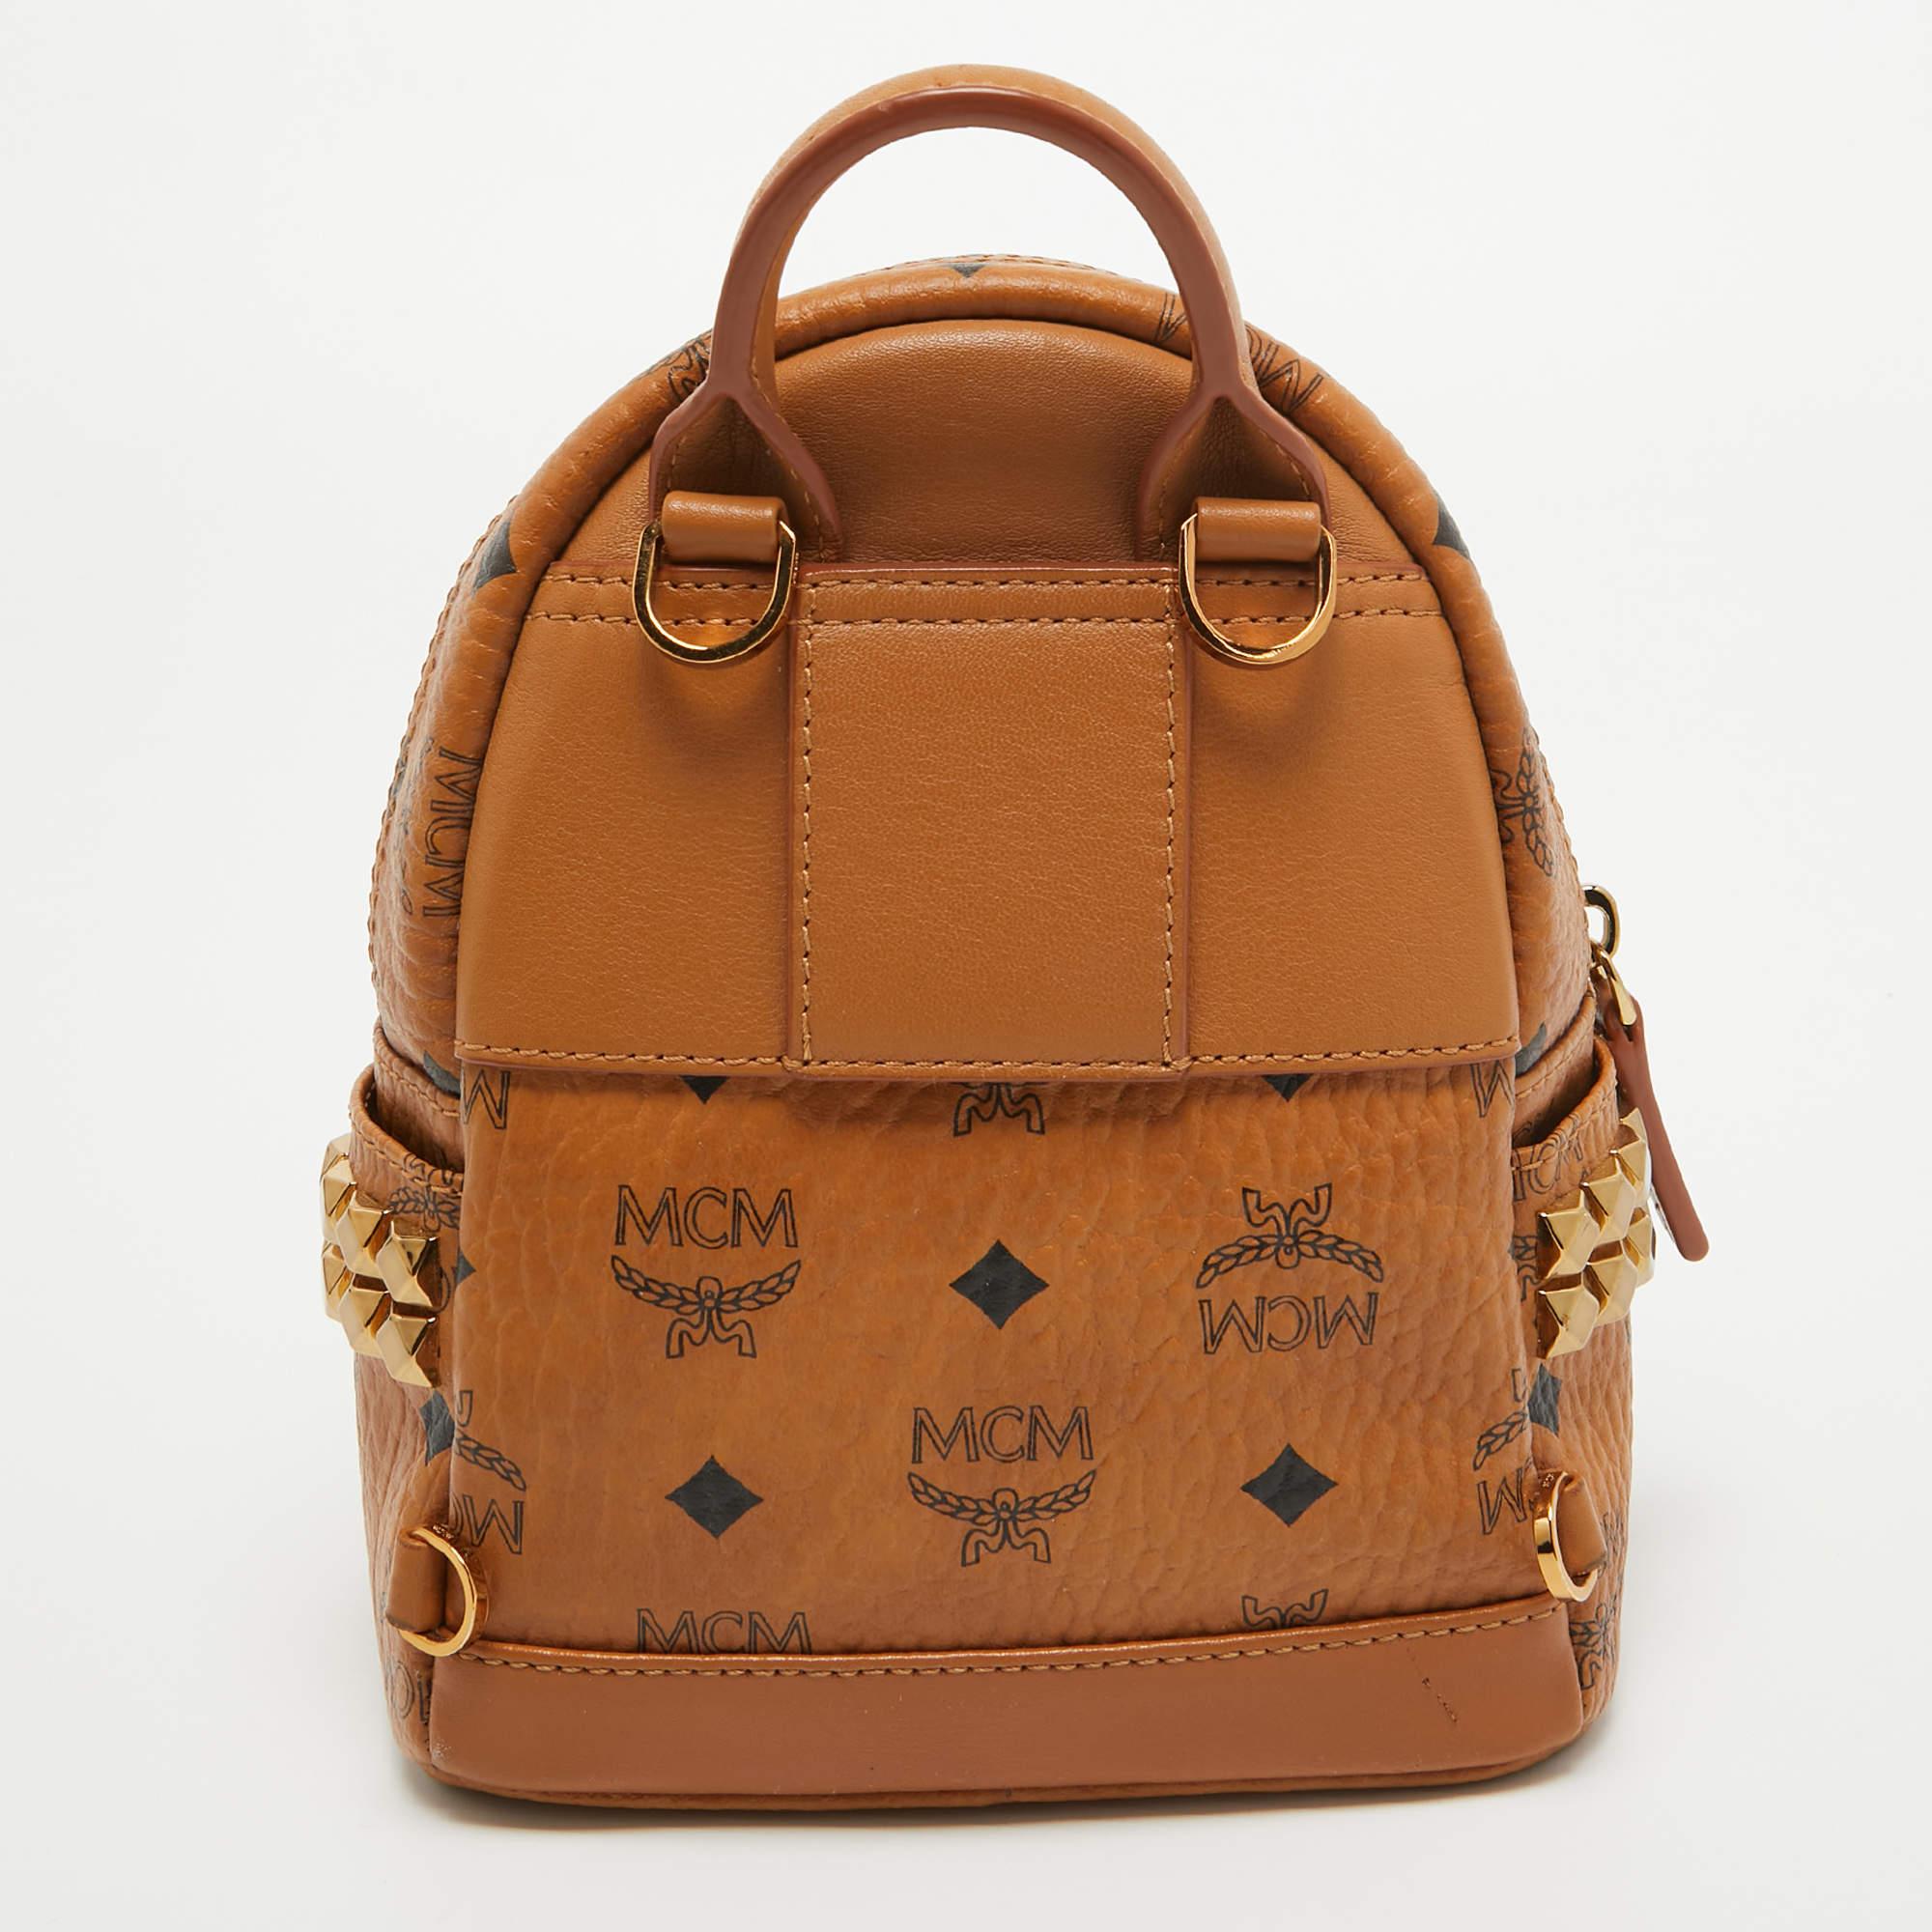 Perfect for conveniently housing your essentials in one place, this MCM mini backpack is a worthy investment. It has notable details and offers a look of luxury.

